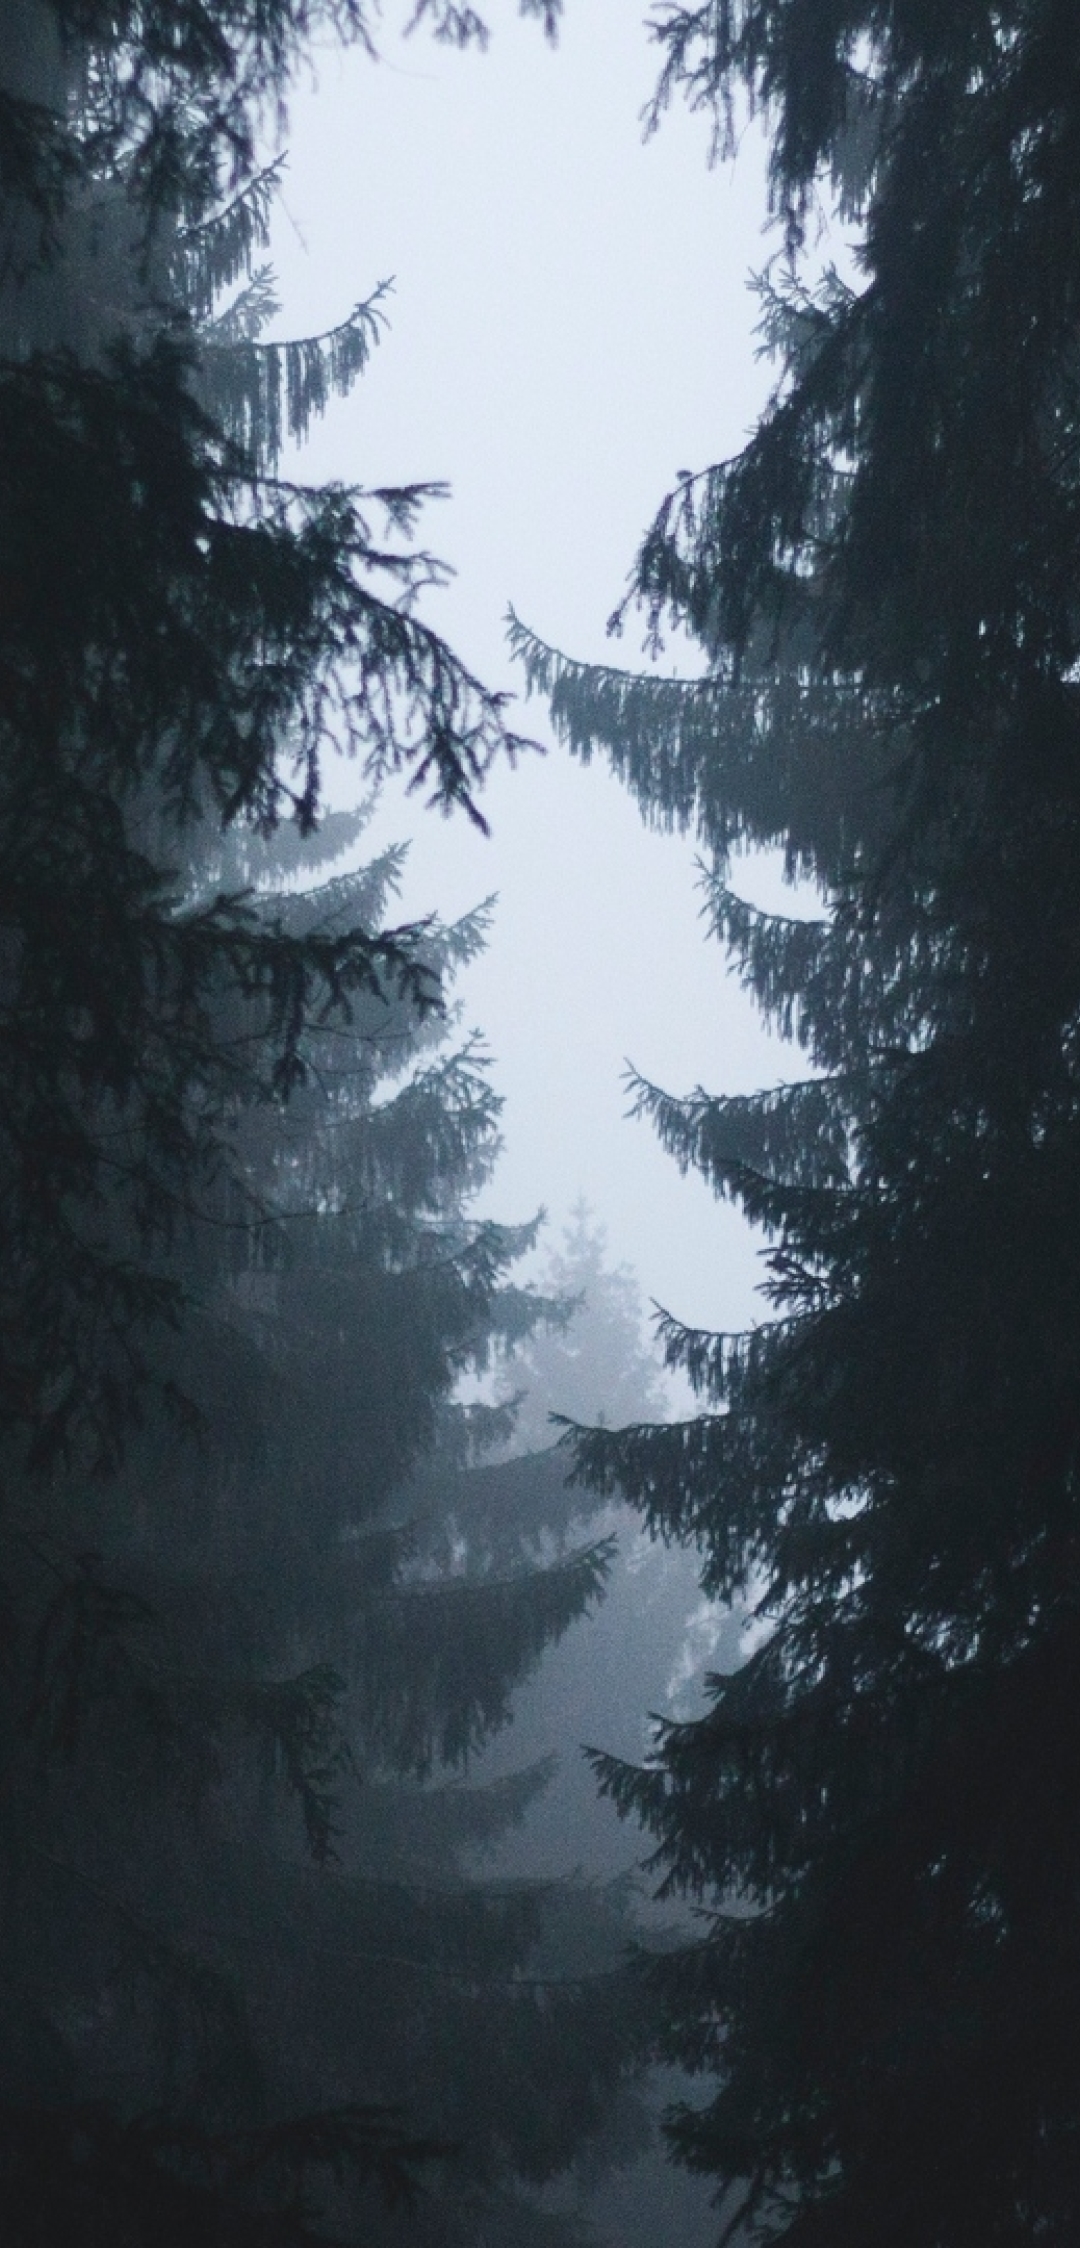 A foggy forest with trees in the foreground. - Foggy forest